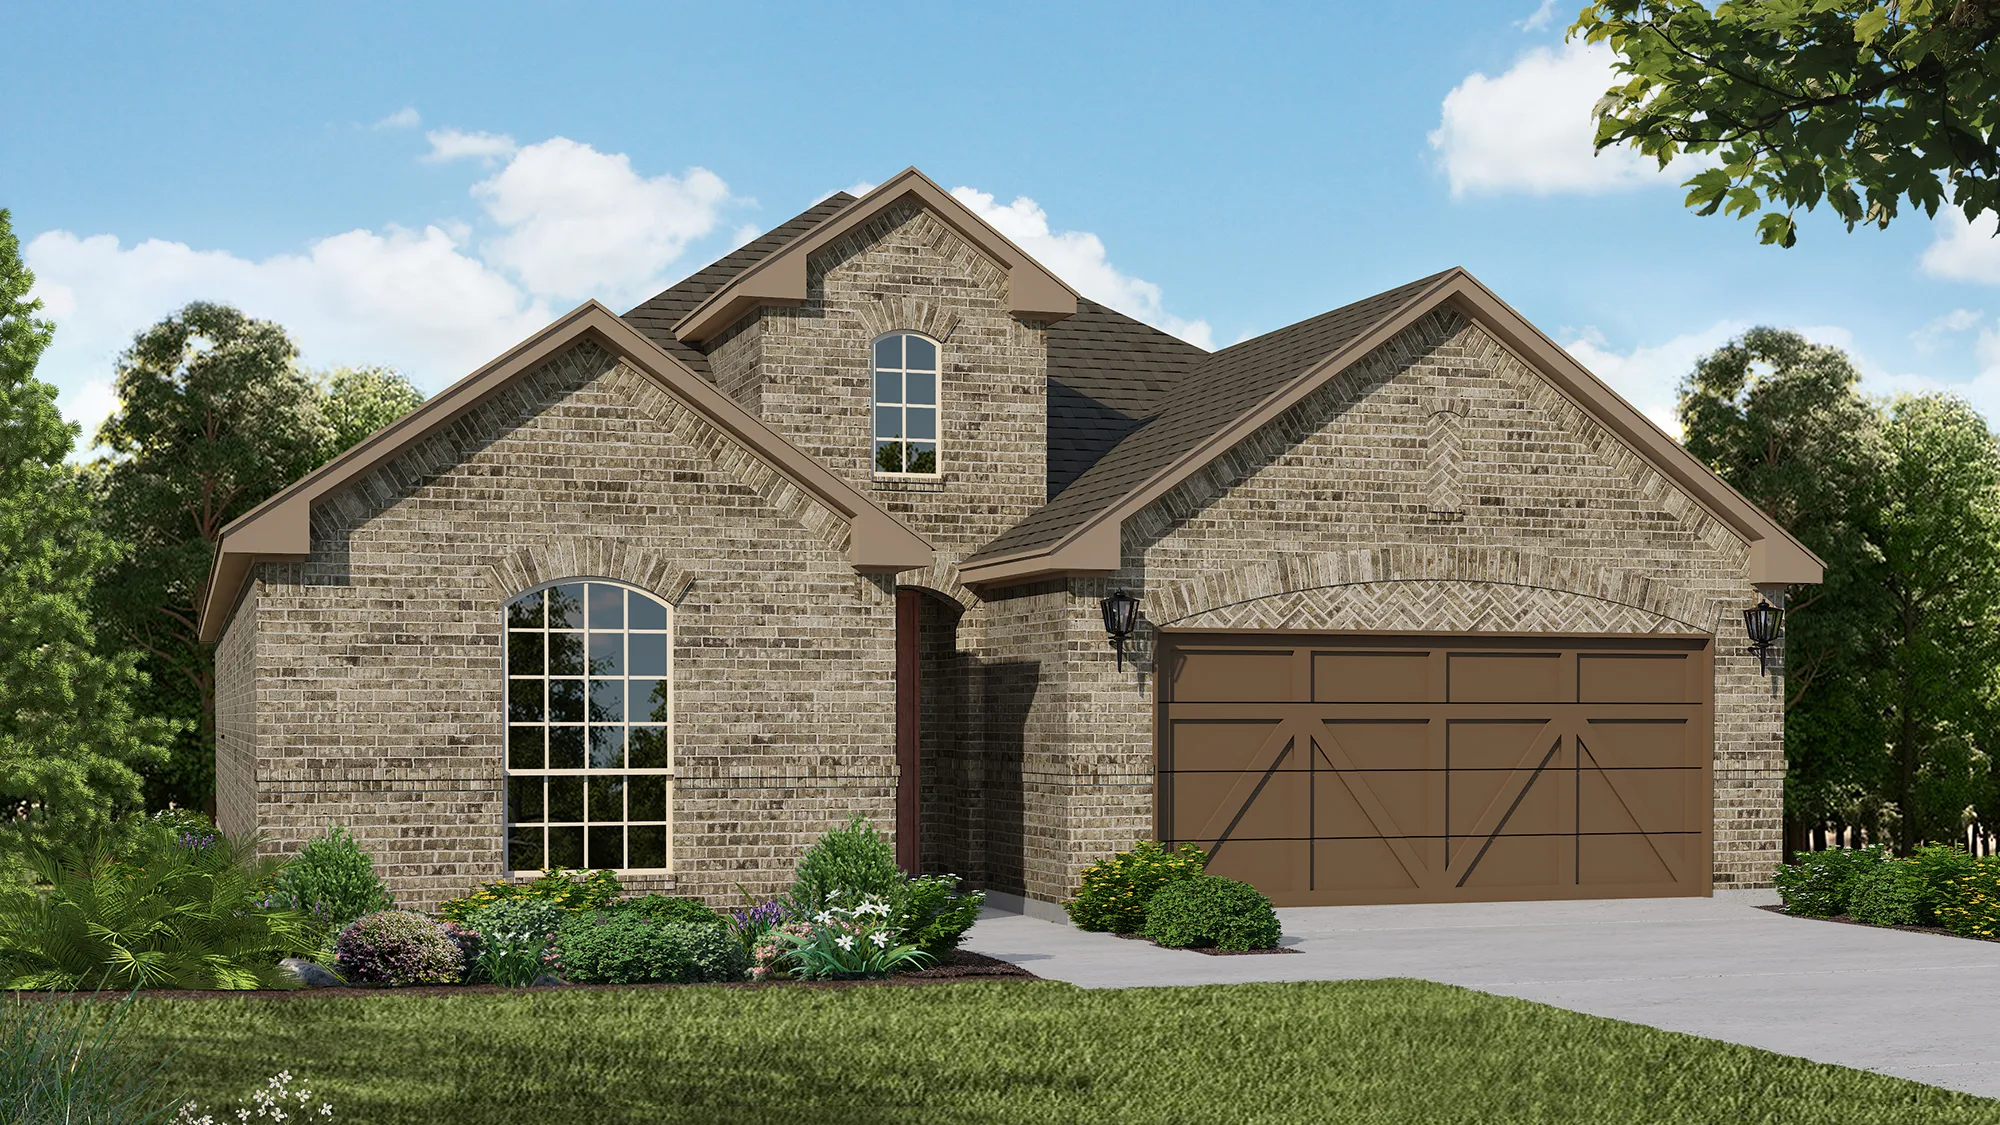 Plan 1530 Elevation A by American Legend Homes